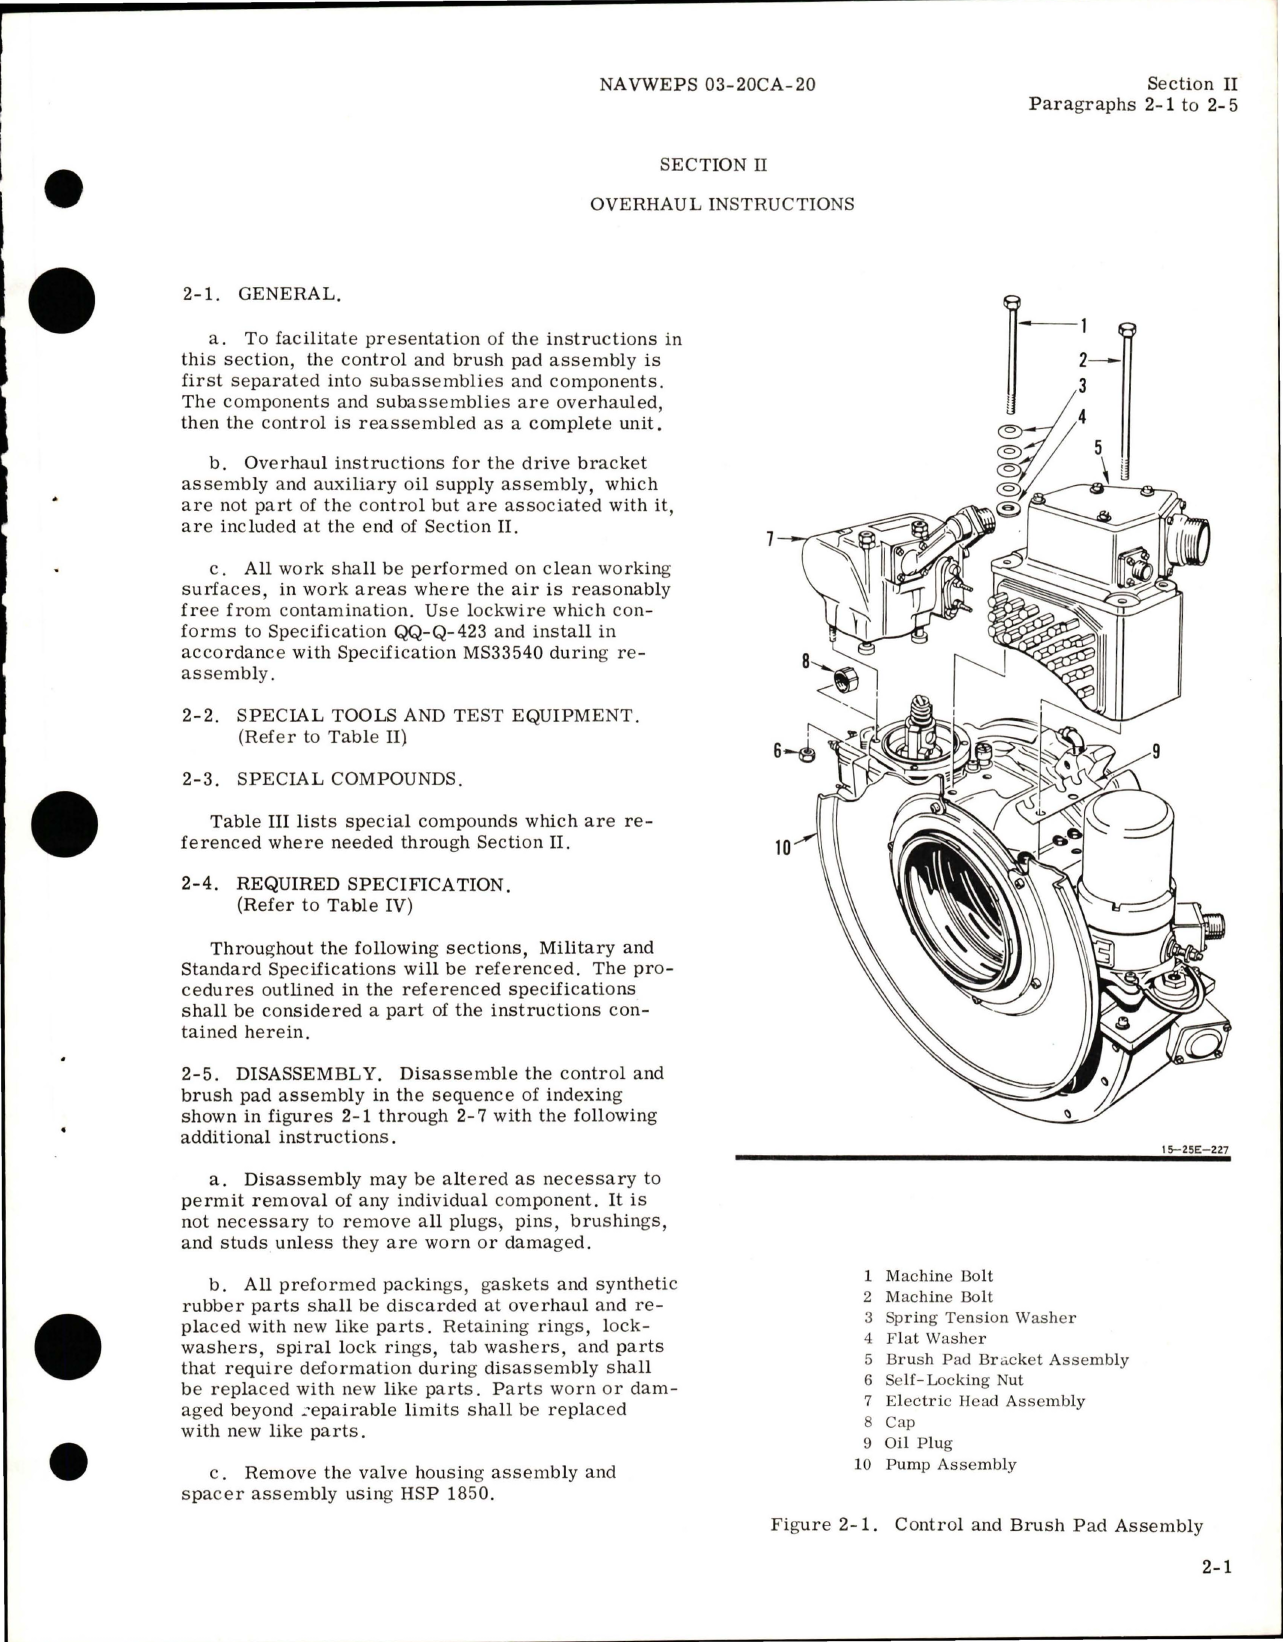 Sample page 5 from AirCorps Library document: Overhaul Instructions for Control & Brush Pad Assy, Drive Bracket Assy, and Auxiliary Oil Supply Assy